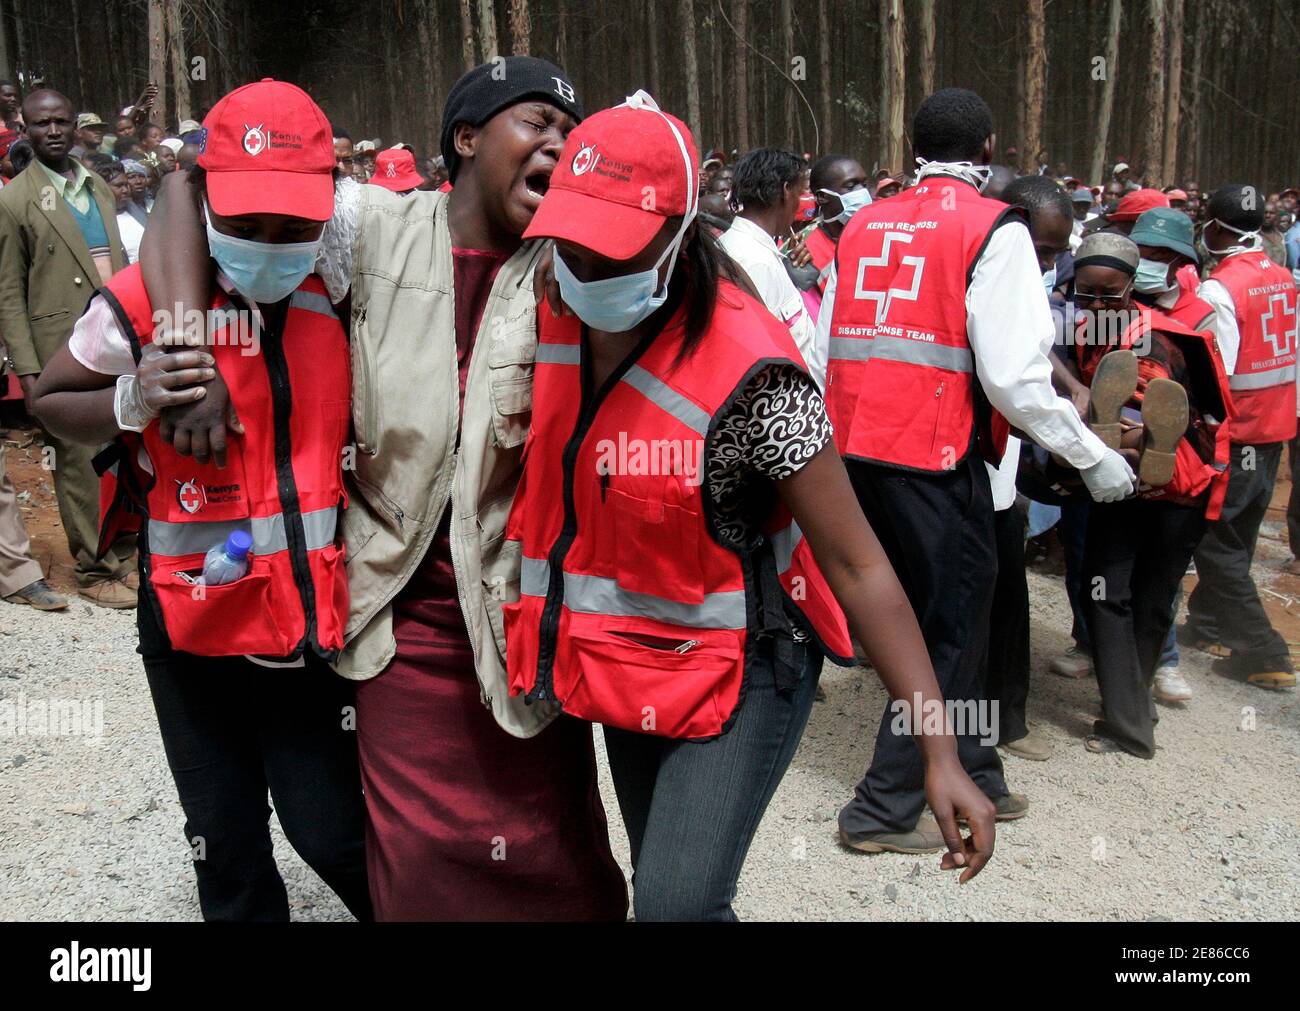 Kenya Red Cross workers carry a mourner during the mass burial of 89 people  killed in a fire a fortnight ago in Molo town, about 196 km (122 miles)  from the capital